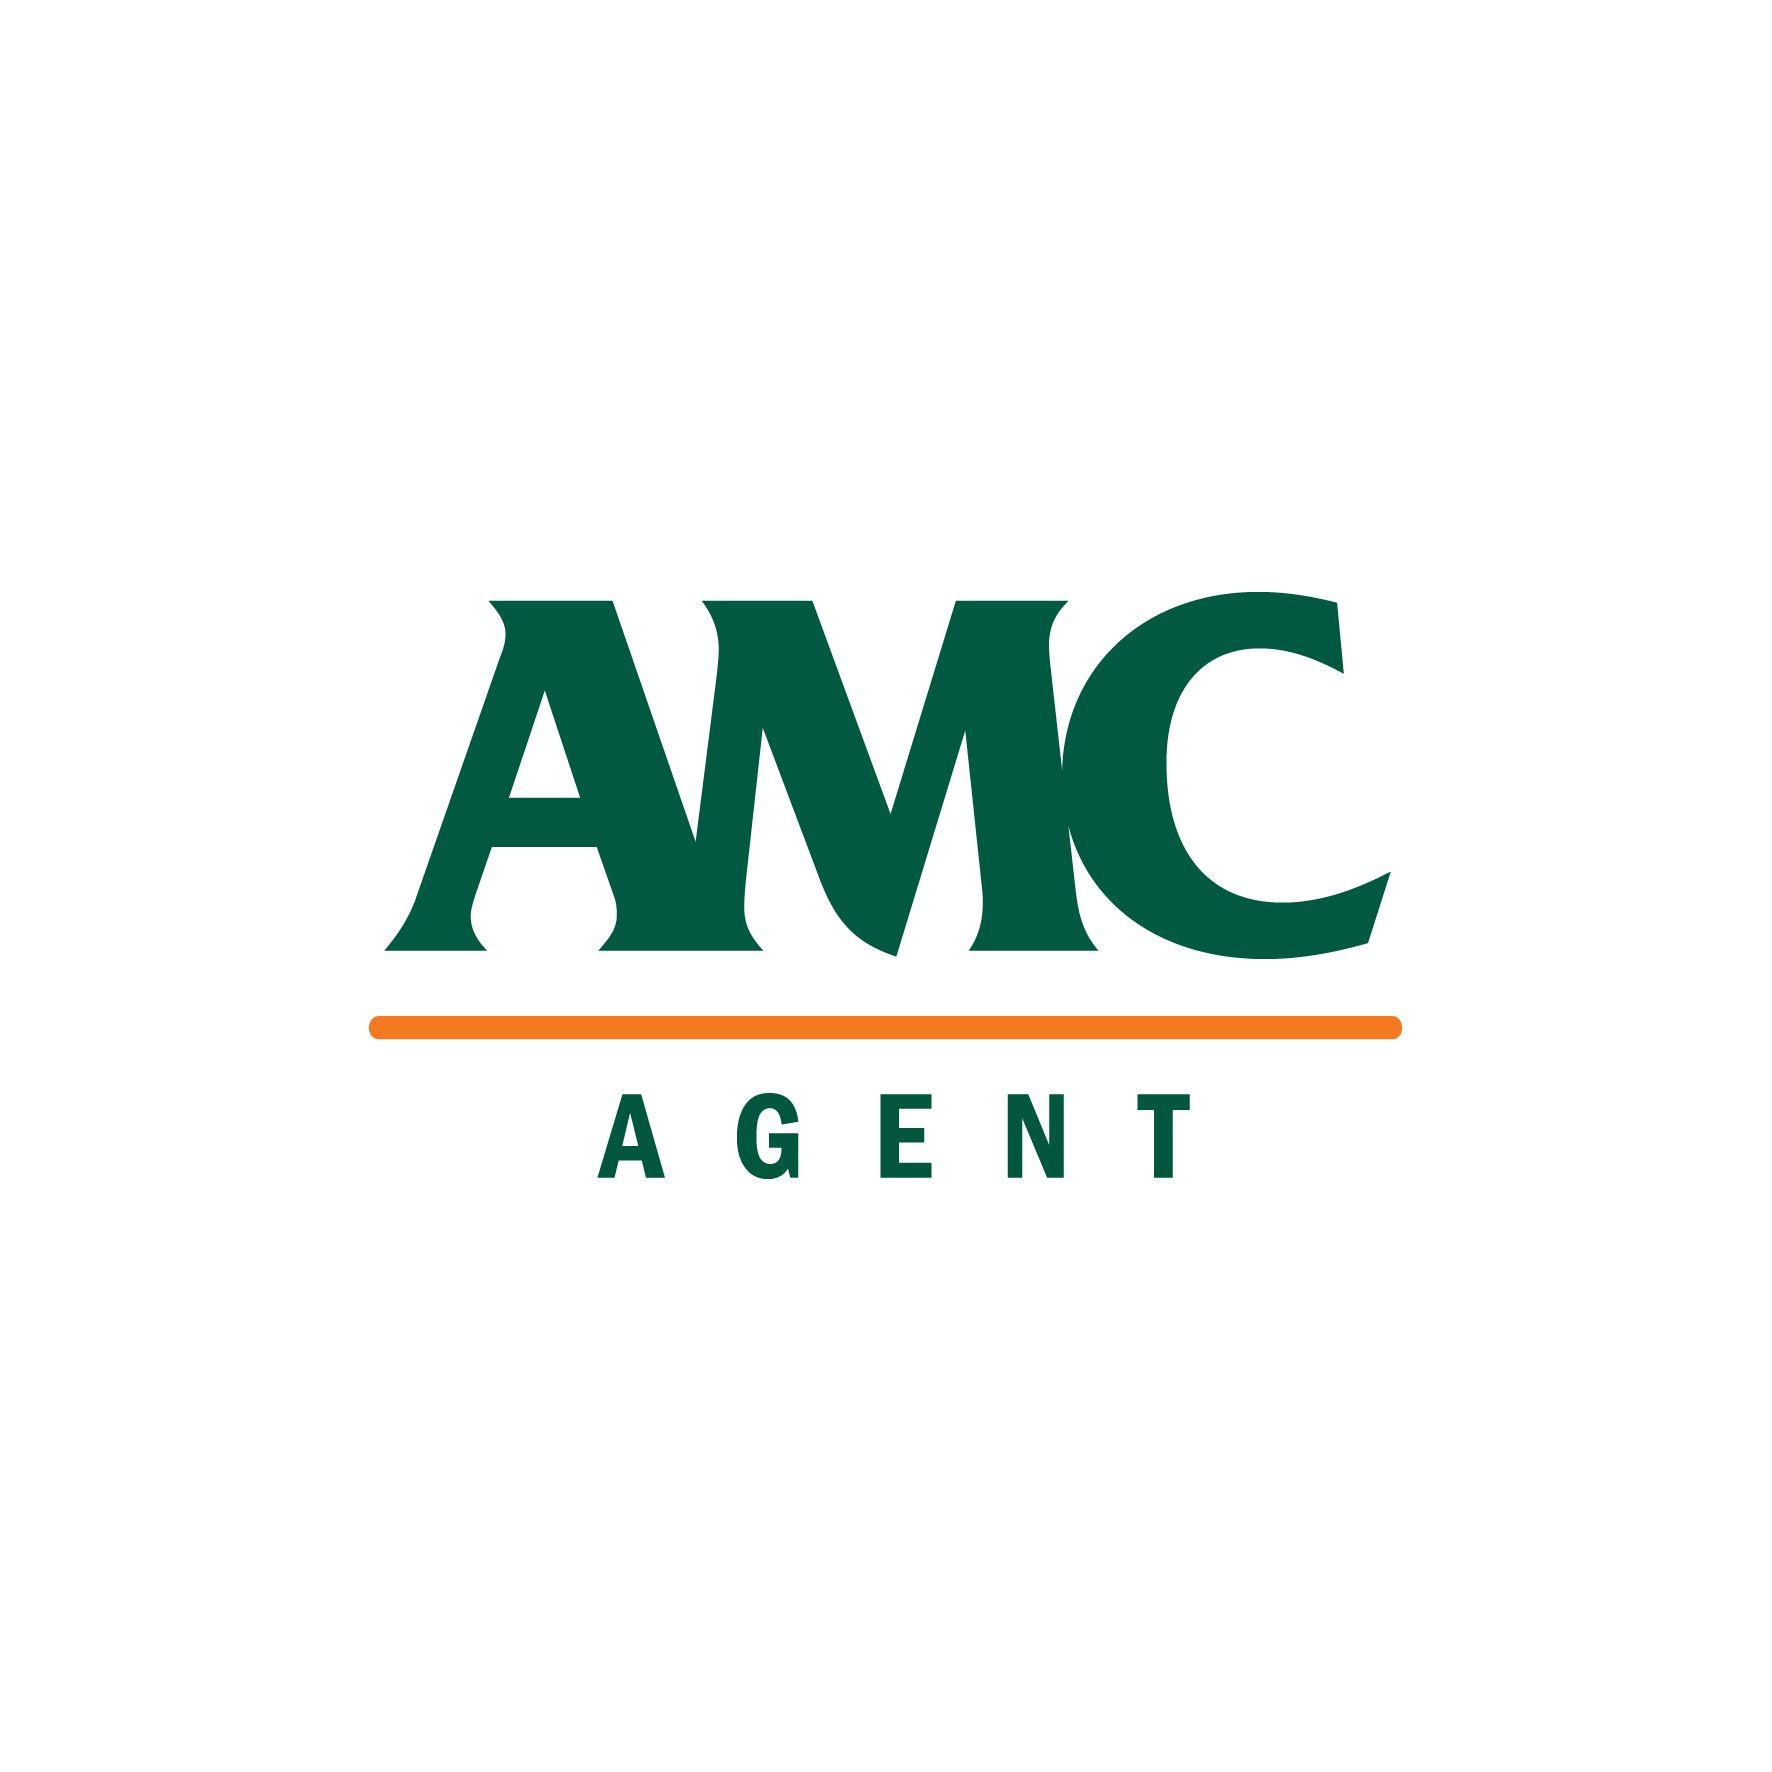 Green and White Square Logo - Standard 4 colour AMC logo with Agent copy - white square - George F ...